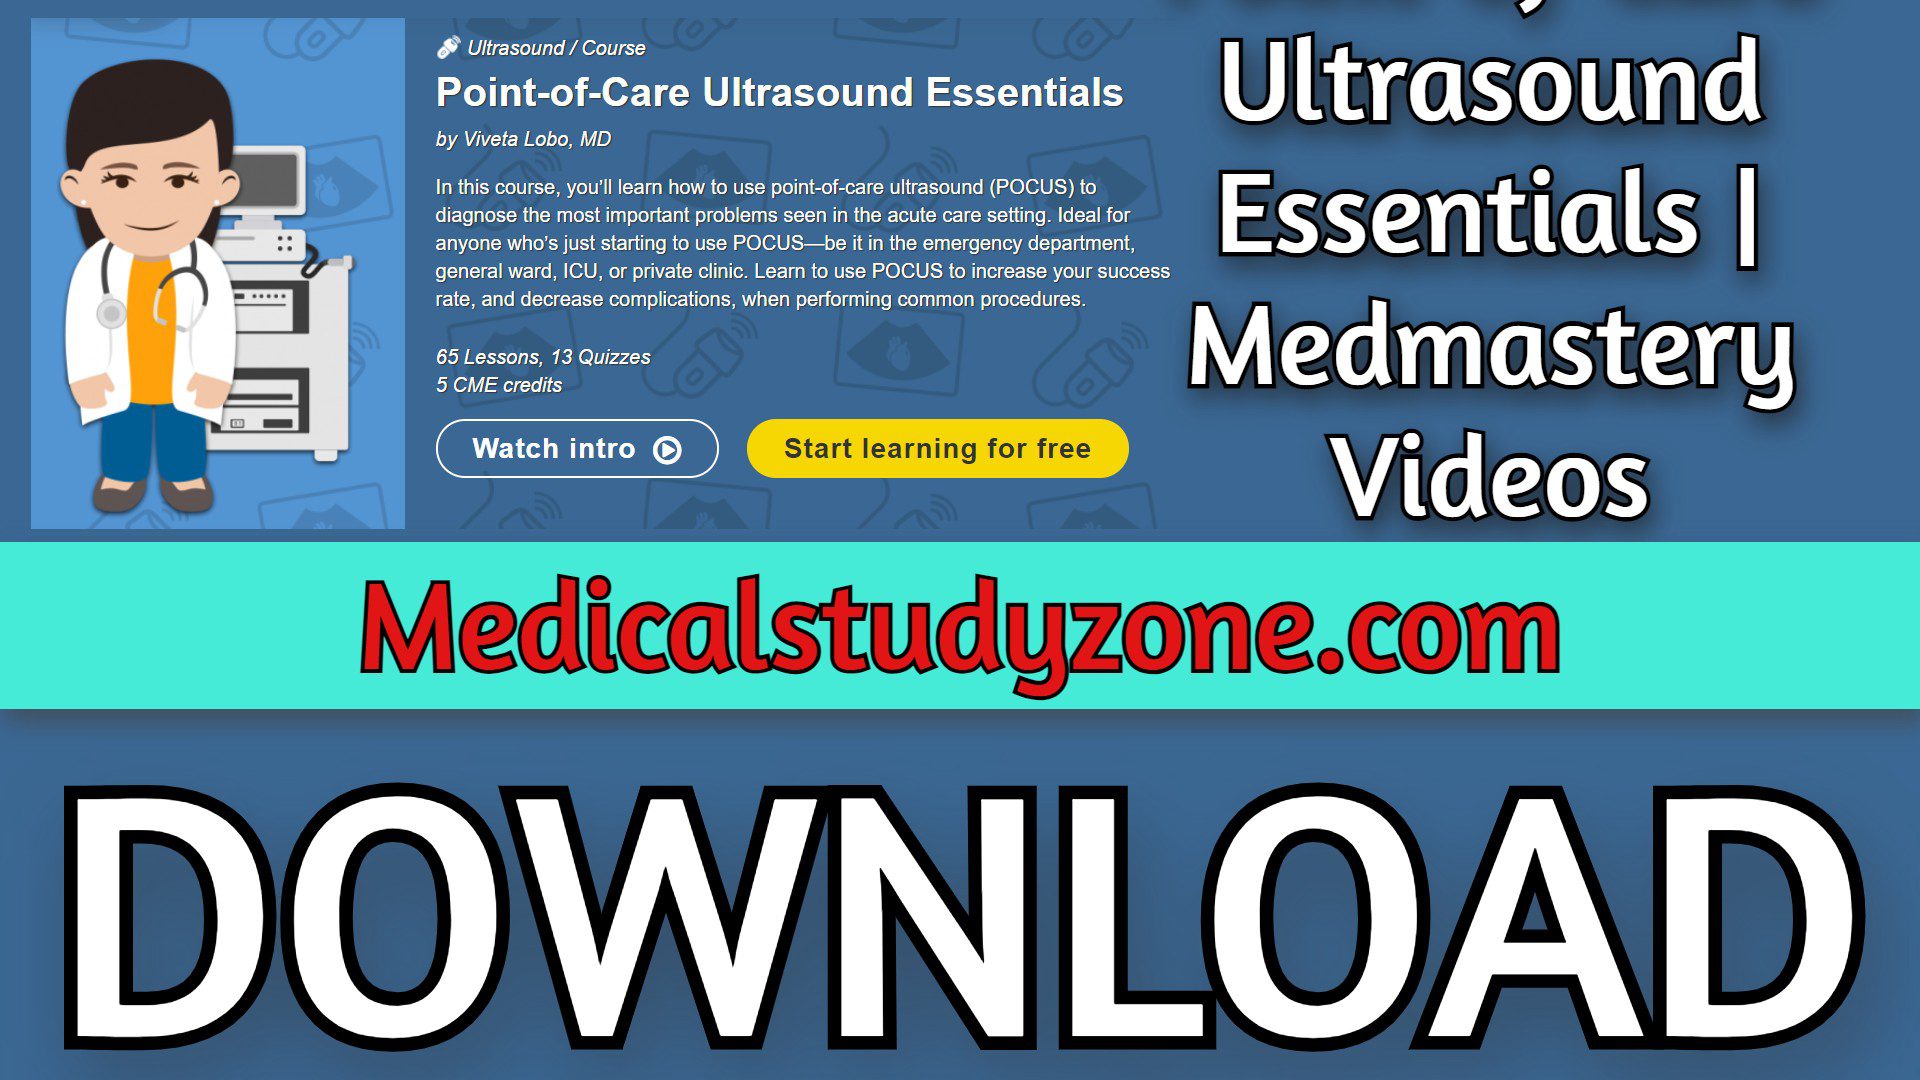 Point-of-Care Ultrasound Essentials | Medmastery 2021 Videos Free Download